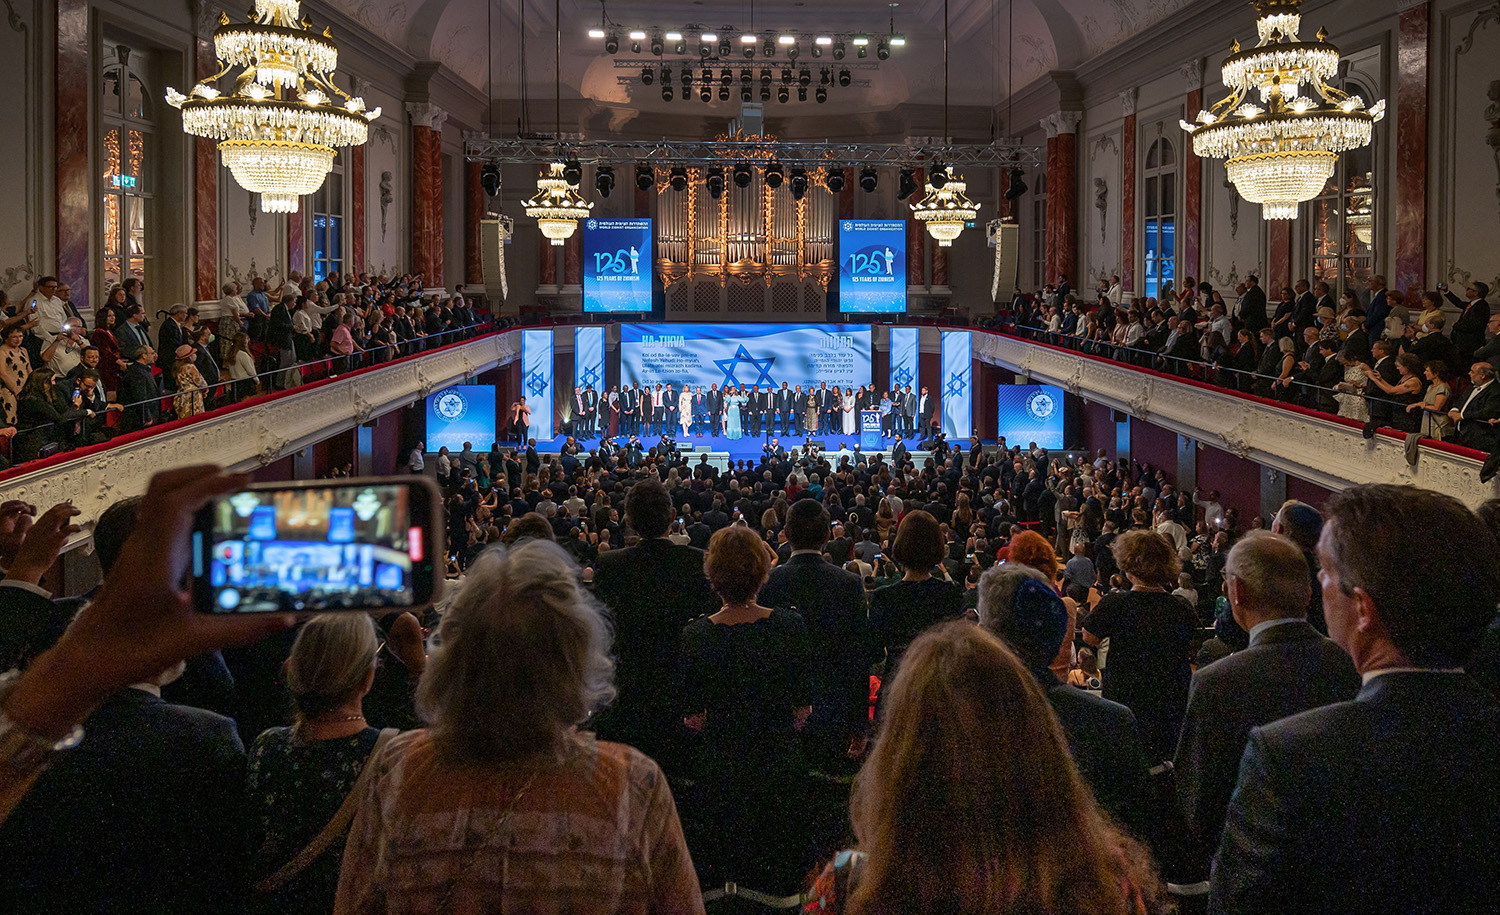 
Guests sing the Israeli national anthem at the end of a gala to mark the 125th anniversary of the First Zionist Congress at Basel&#8217;s historic Stadtcasino on August 29, 2022. FABRICE COFFRINI/AFP via Getty Images.






